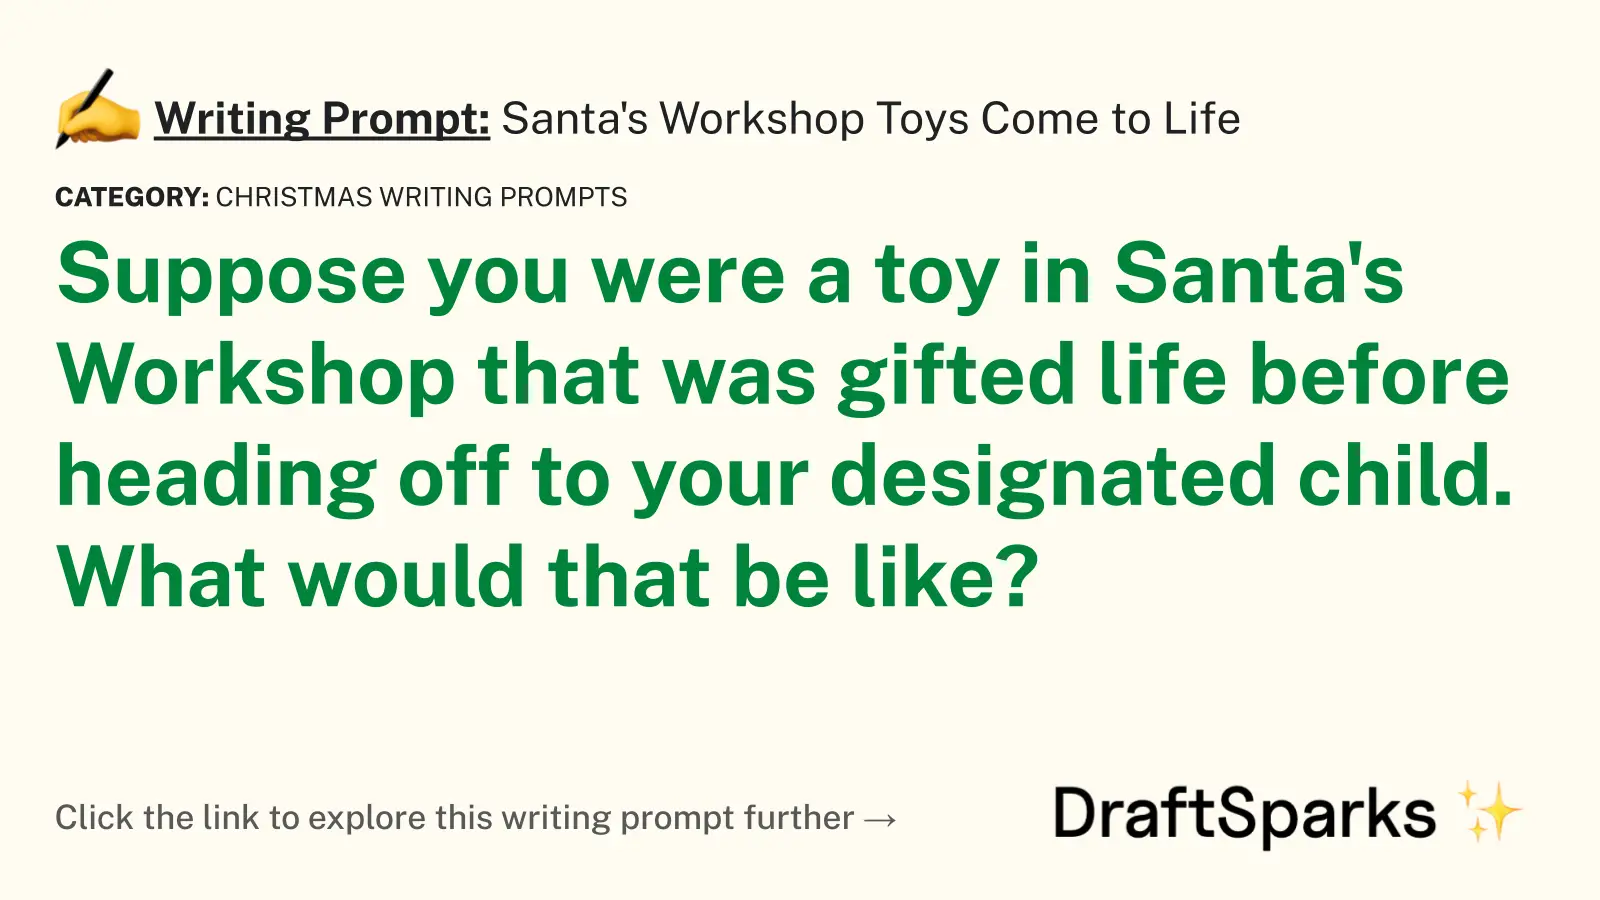 Santa’s Workshop Toys Come to Life